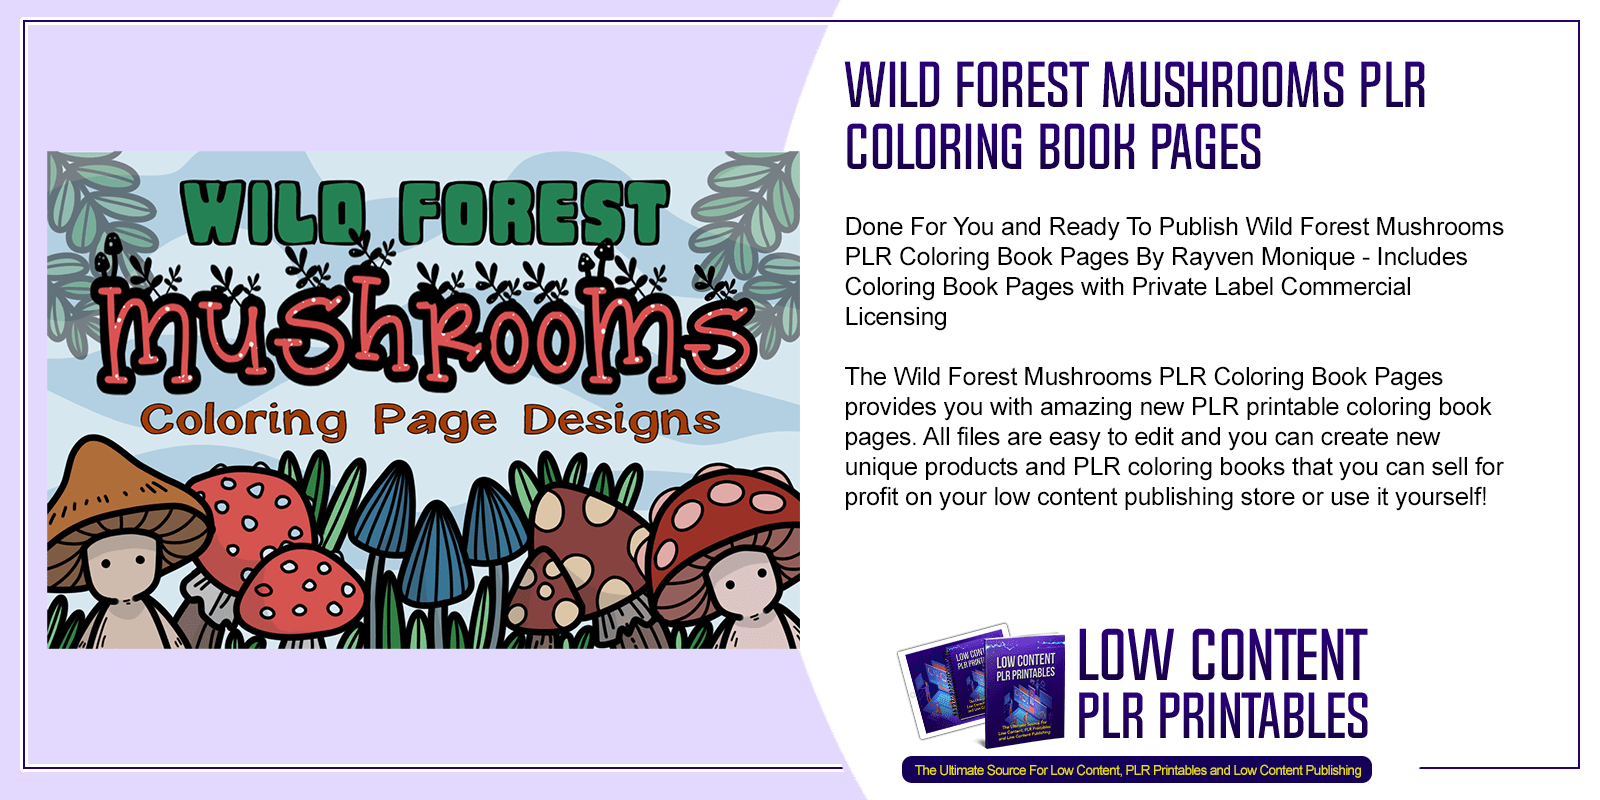 Wild Forest Mushrooms PLR Coloring Book Pages